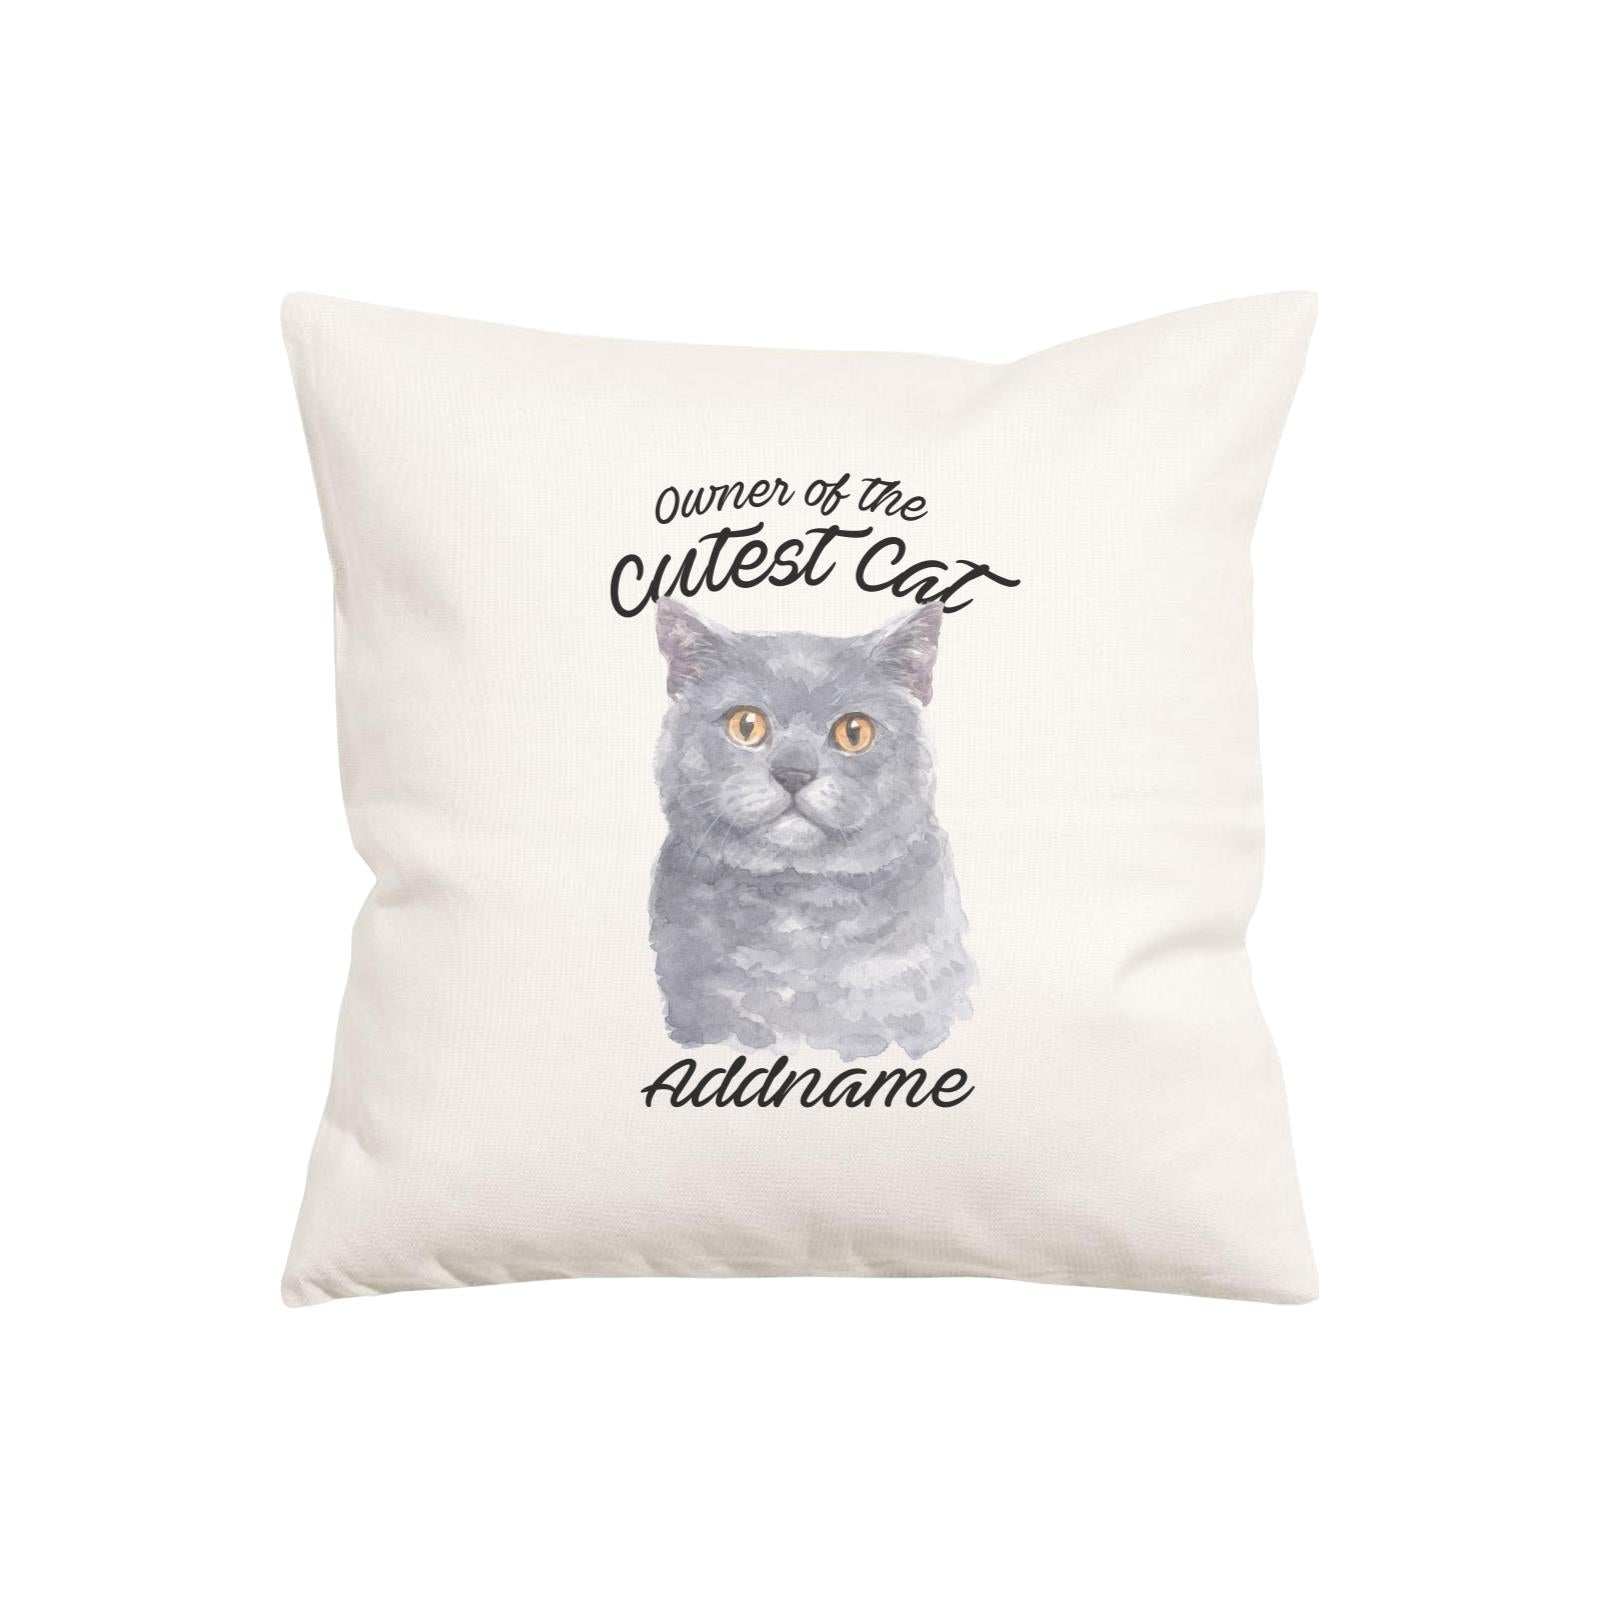 Watercolor Owner Of The Cutest Cat British Shorthair Addname Pillow Cushion